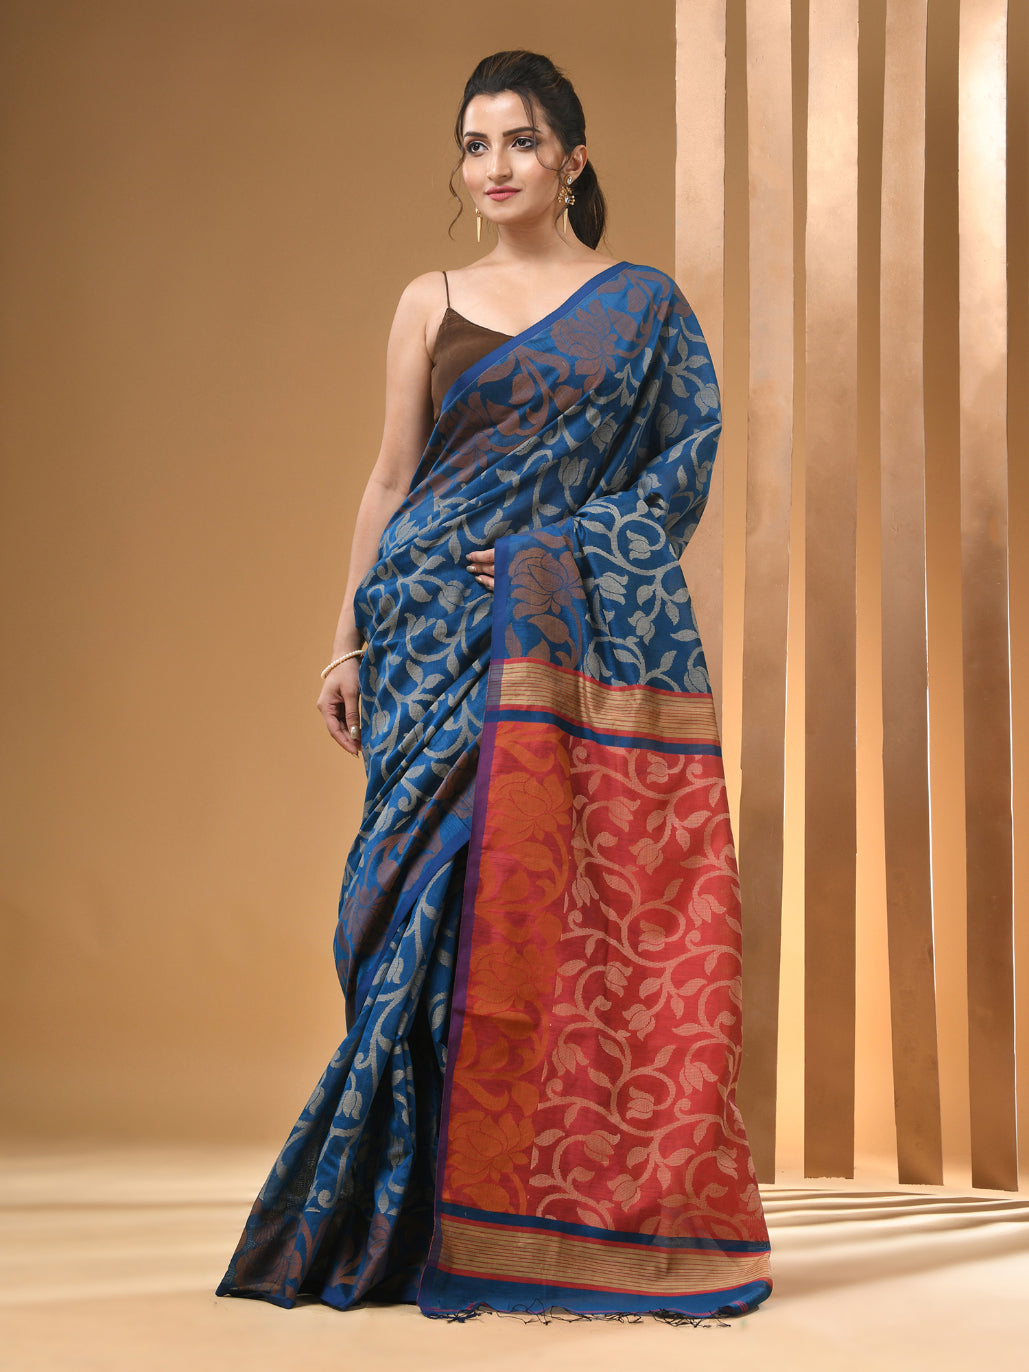 Sky Blue Cotton Handwoven Saree With Floral Designs